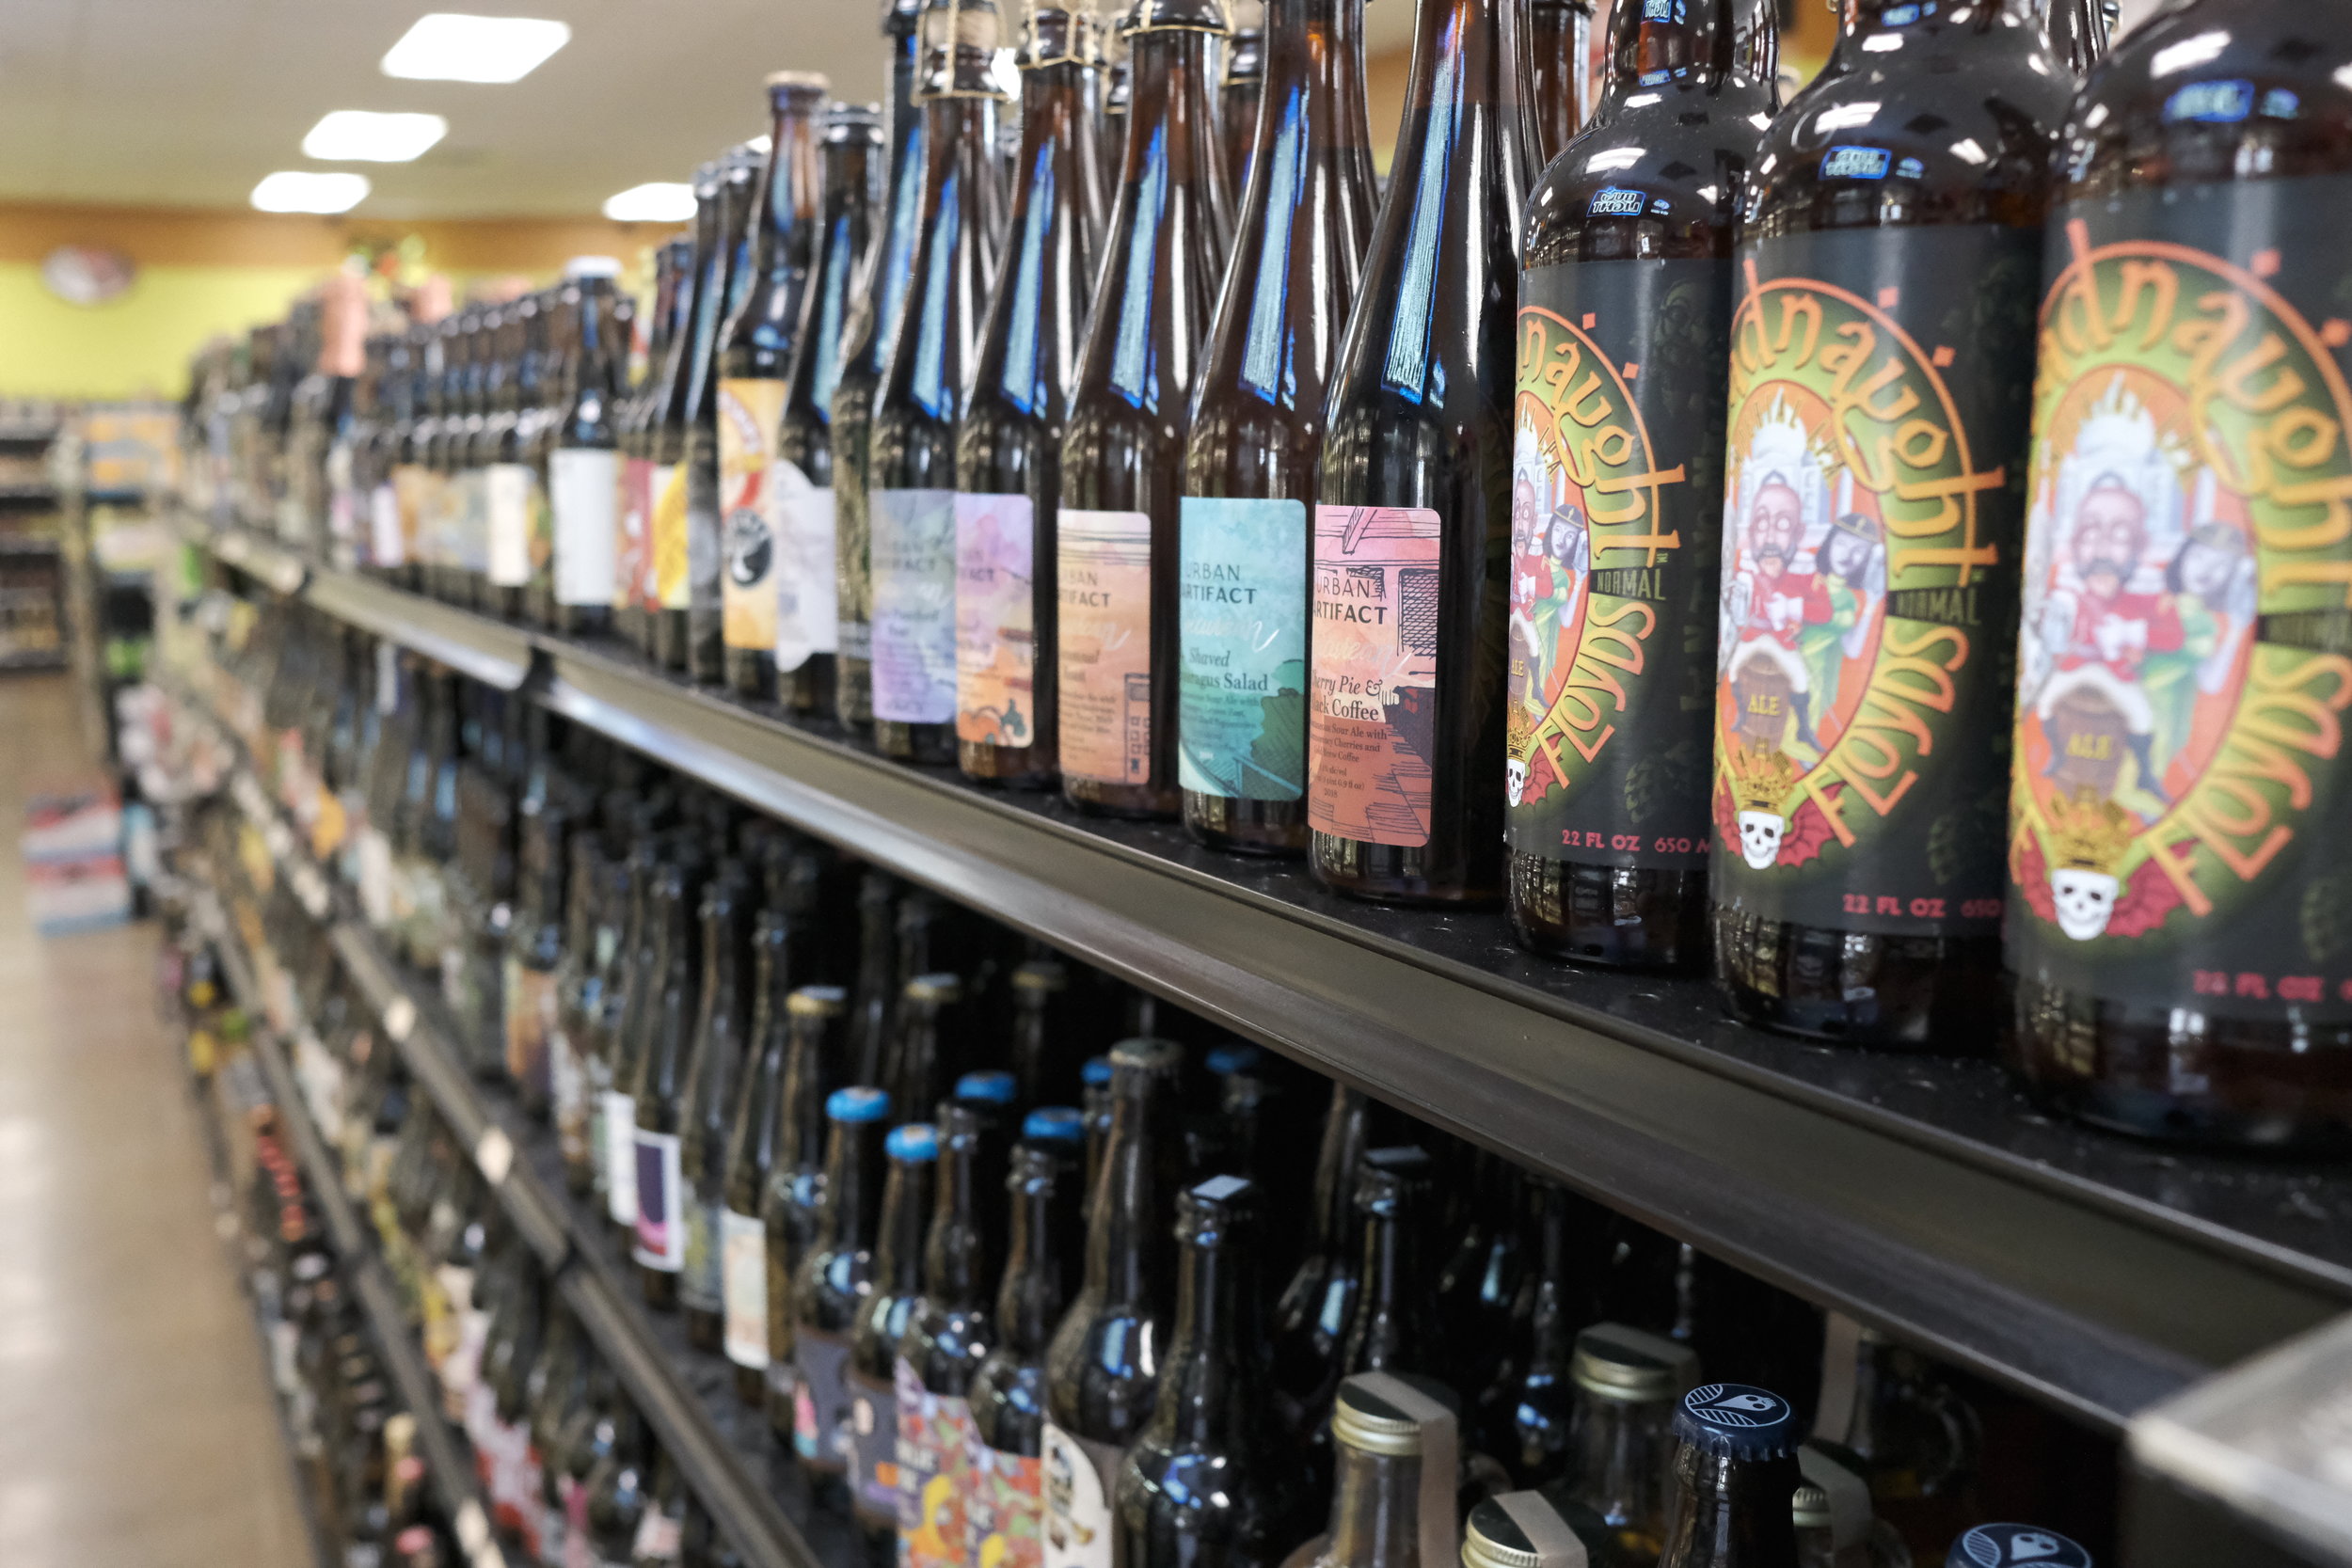  We carry a large selection of single-format craft beer, from recent releases to hidden gems from the past. 